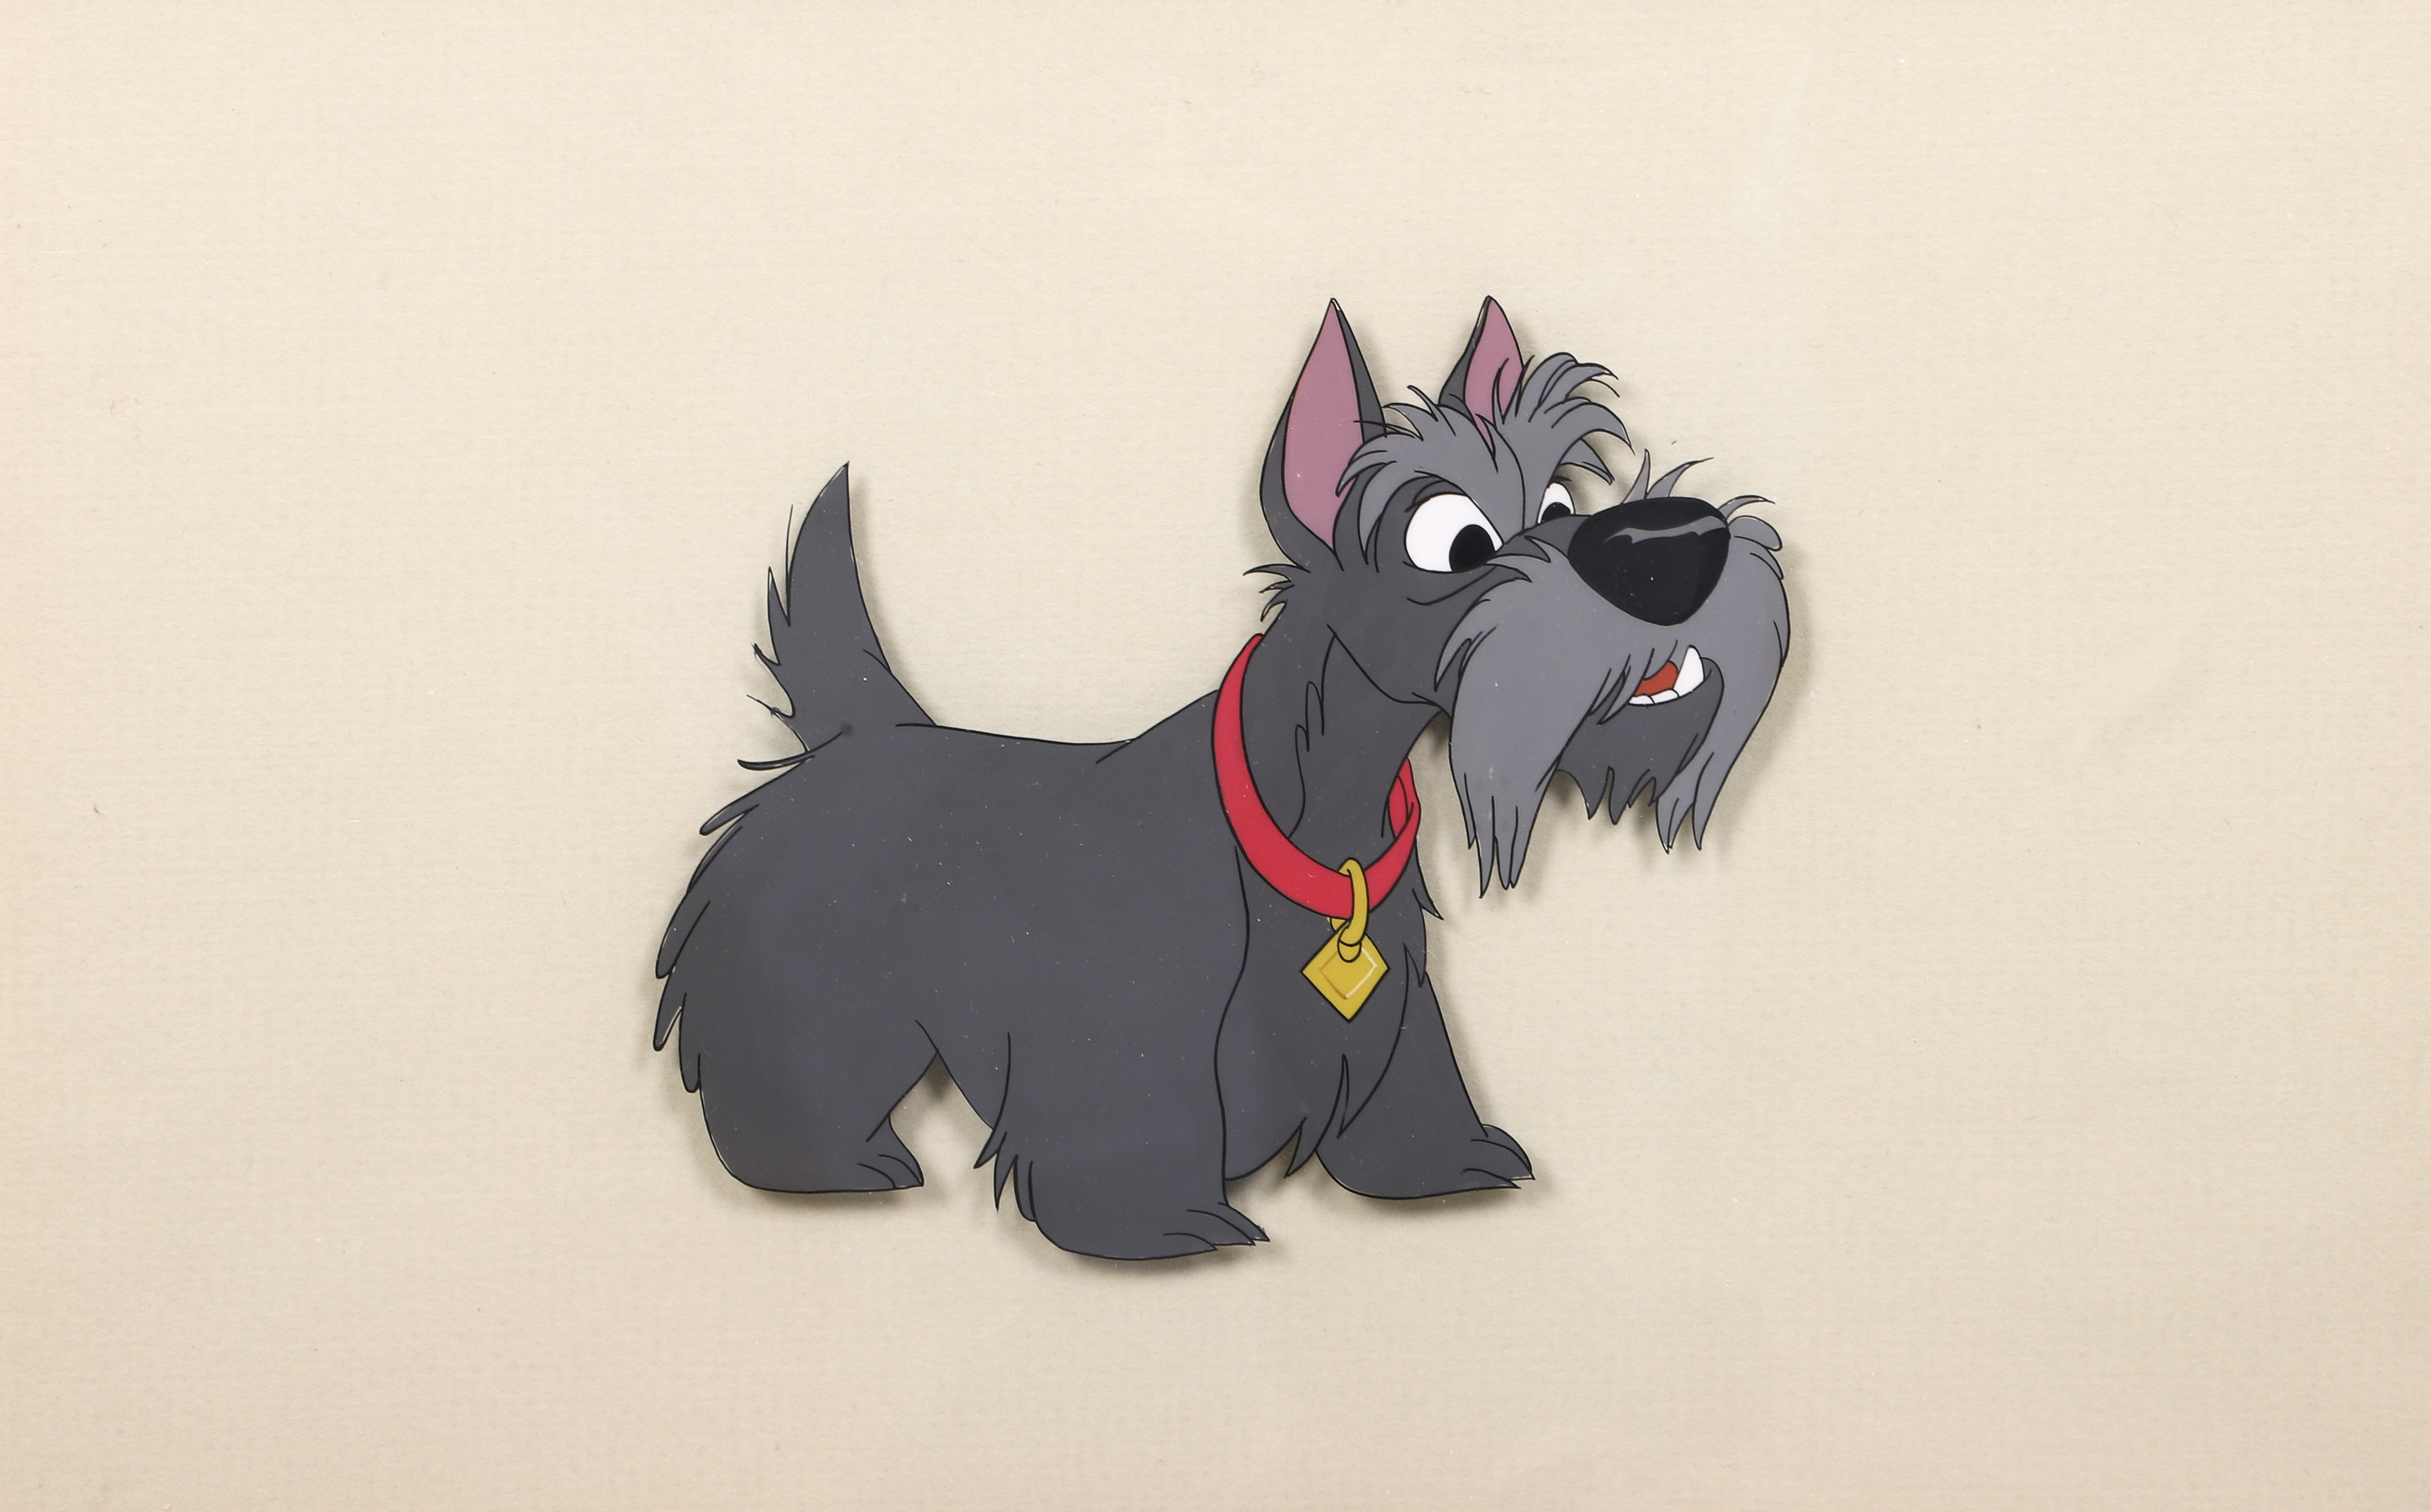 Lady and the Tramp production cel 2e1cad